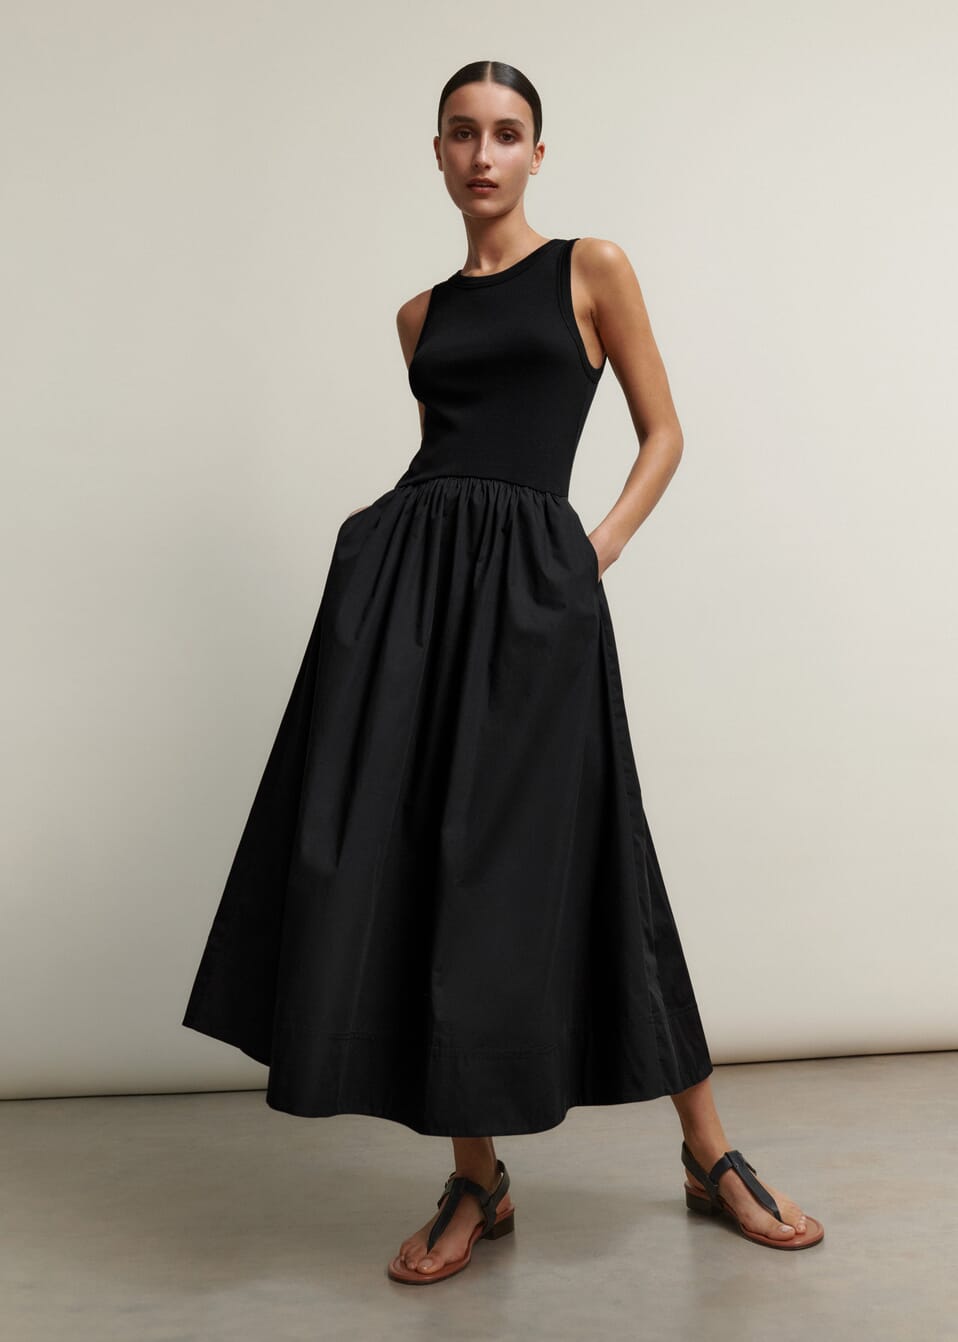 Combining the ease and versatility of a tank top with a crisp cotton skirt, this  Me + Em black dress clashes two textures in the same colour for a seamless, flattering finish.